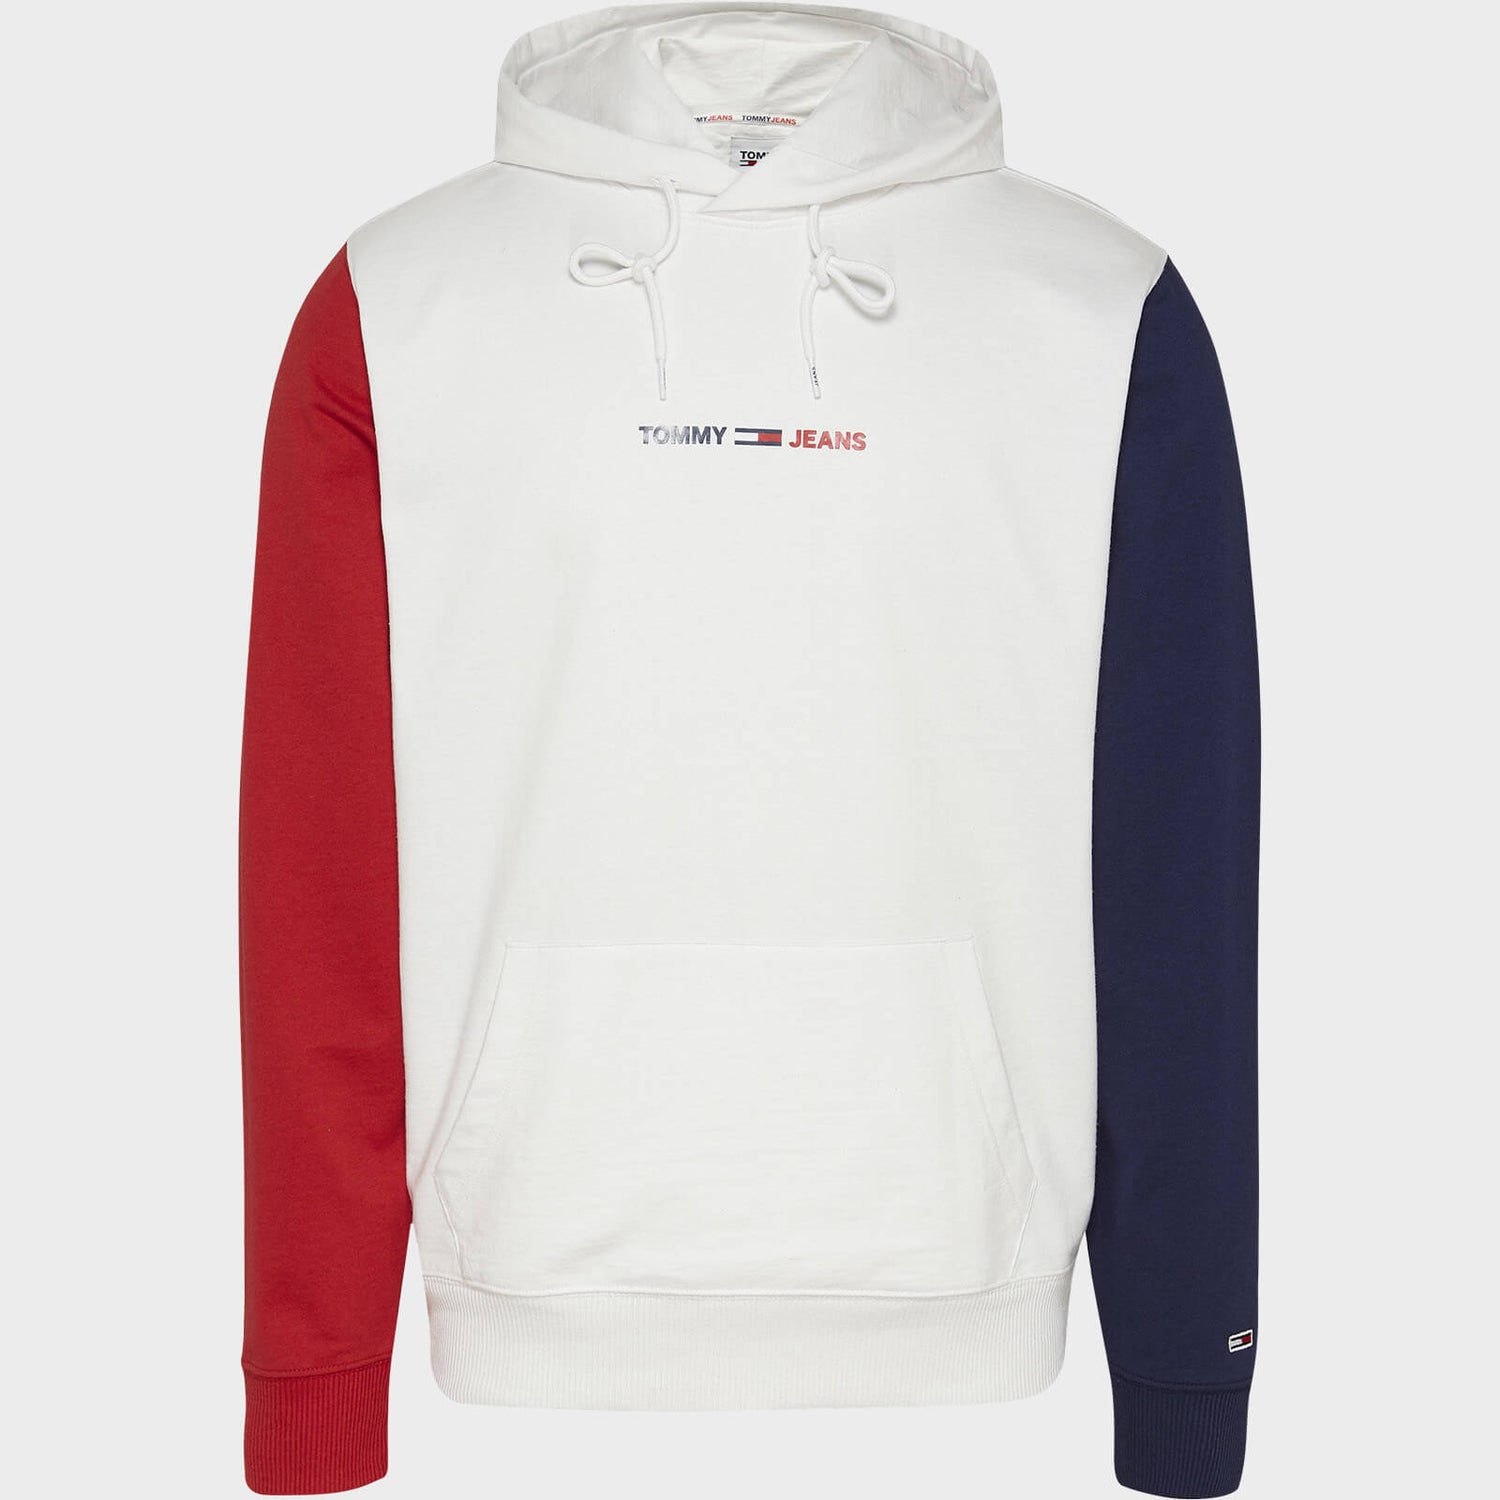 Tommy Jeans Men's Half And Half Colourblock Hoodie - White/Multi